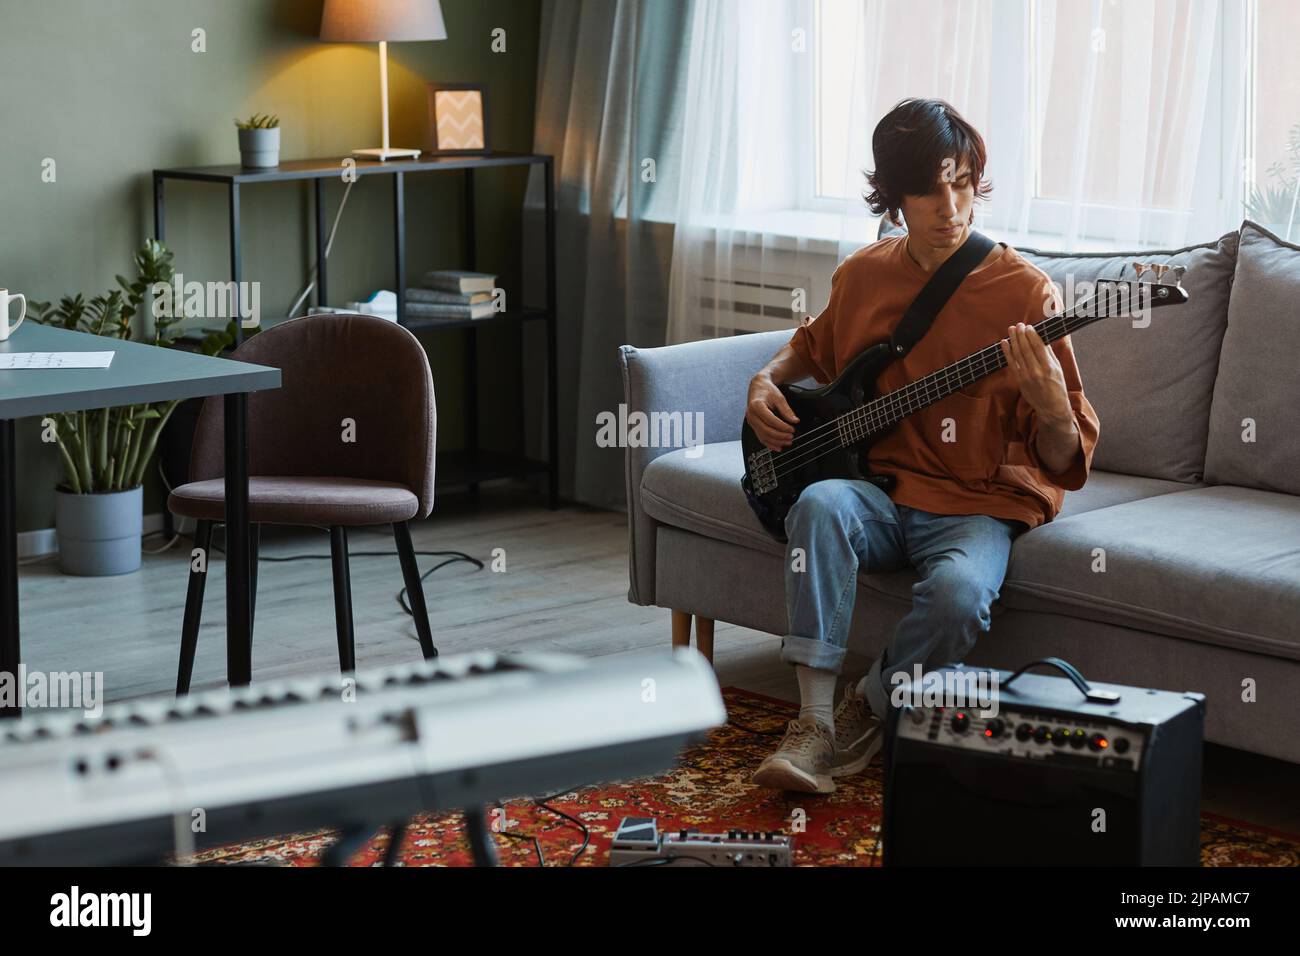 Full length portrait of young man playing electric guitar in cozy home music studio, copy space Stock Photo